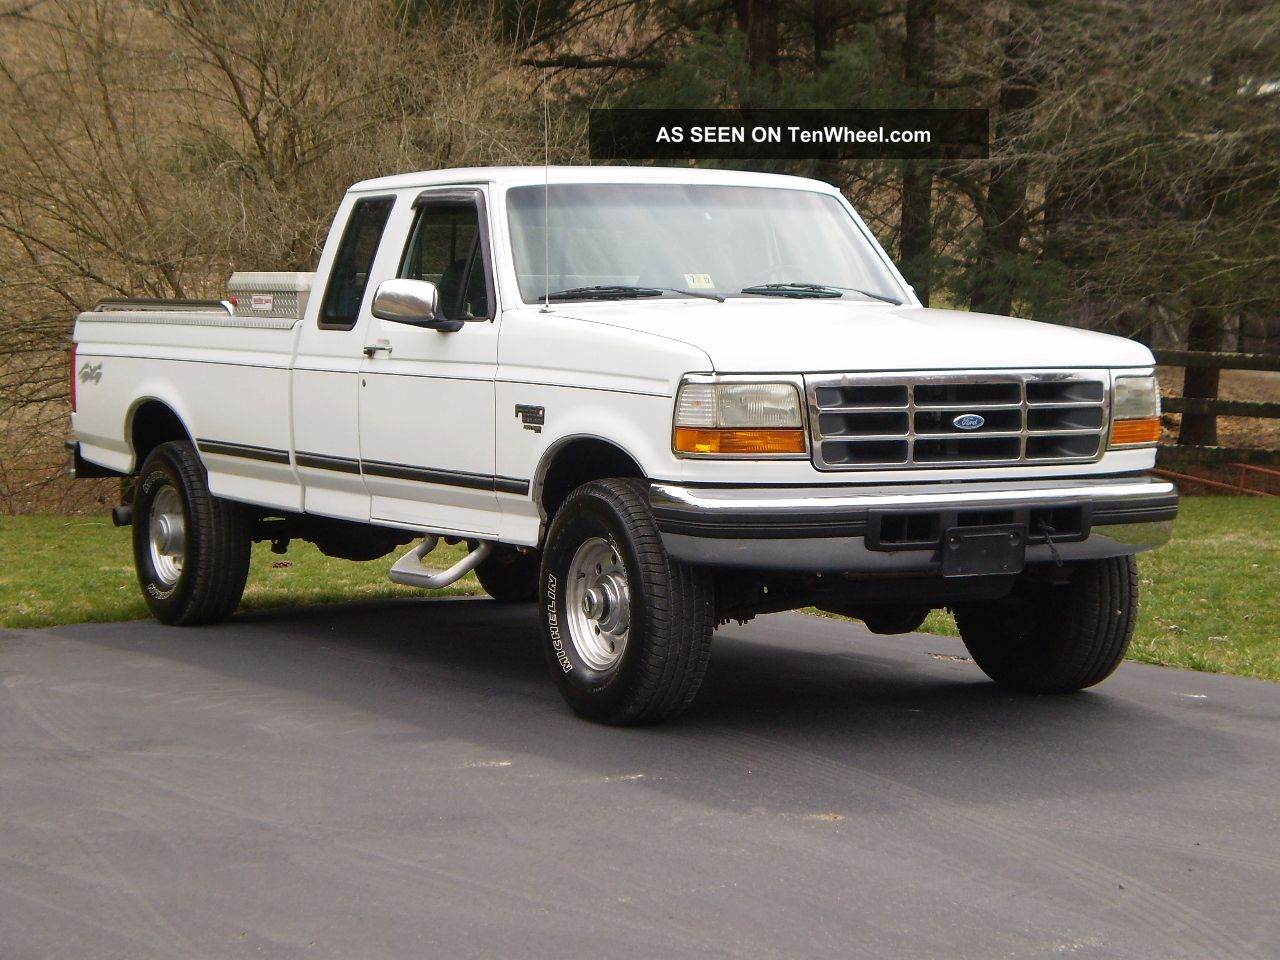 Ford f250 extended cab dimensions